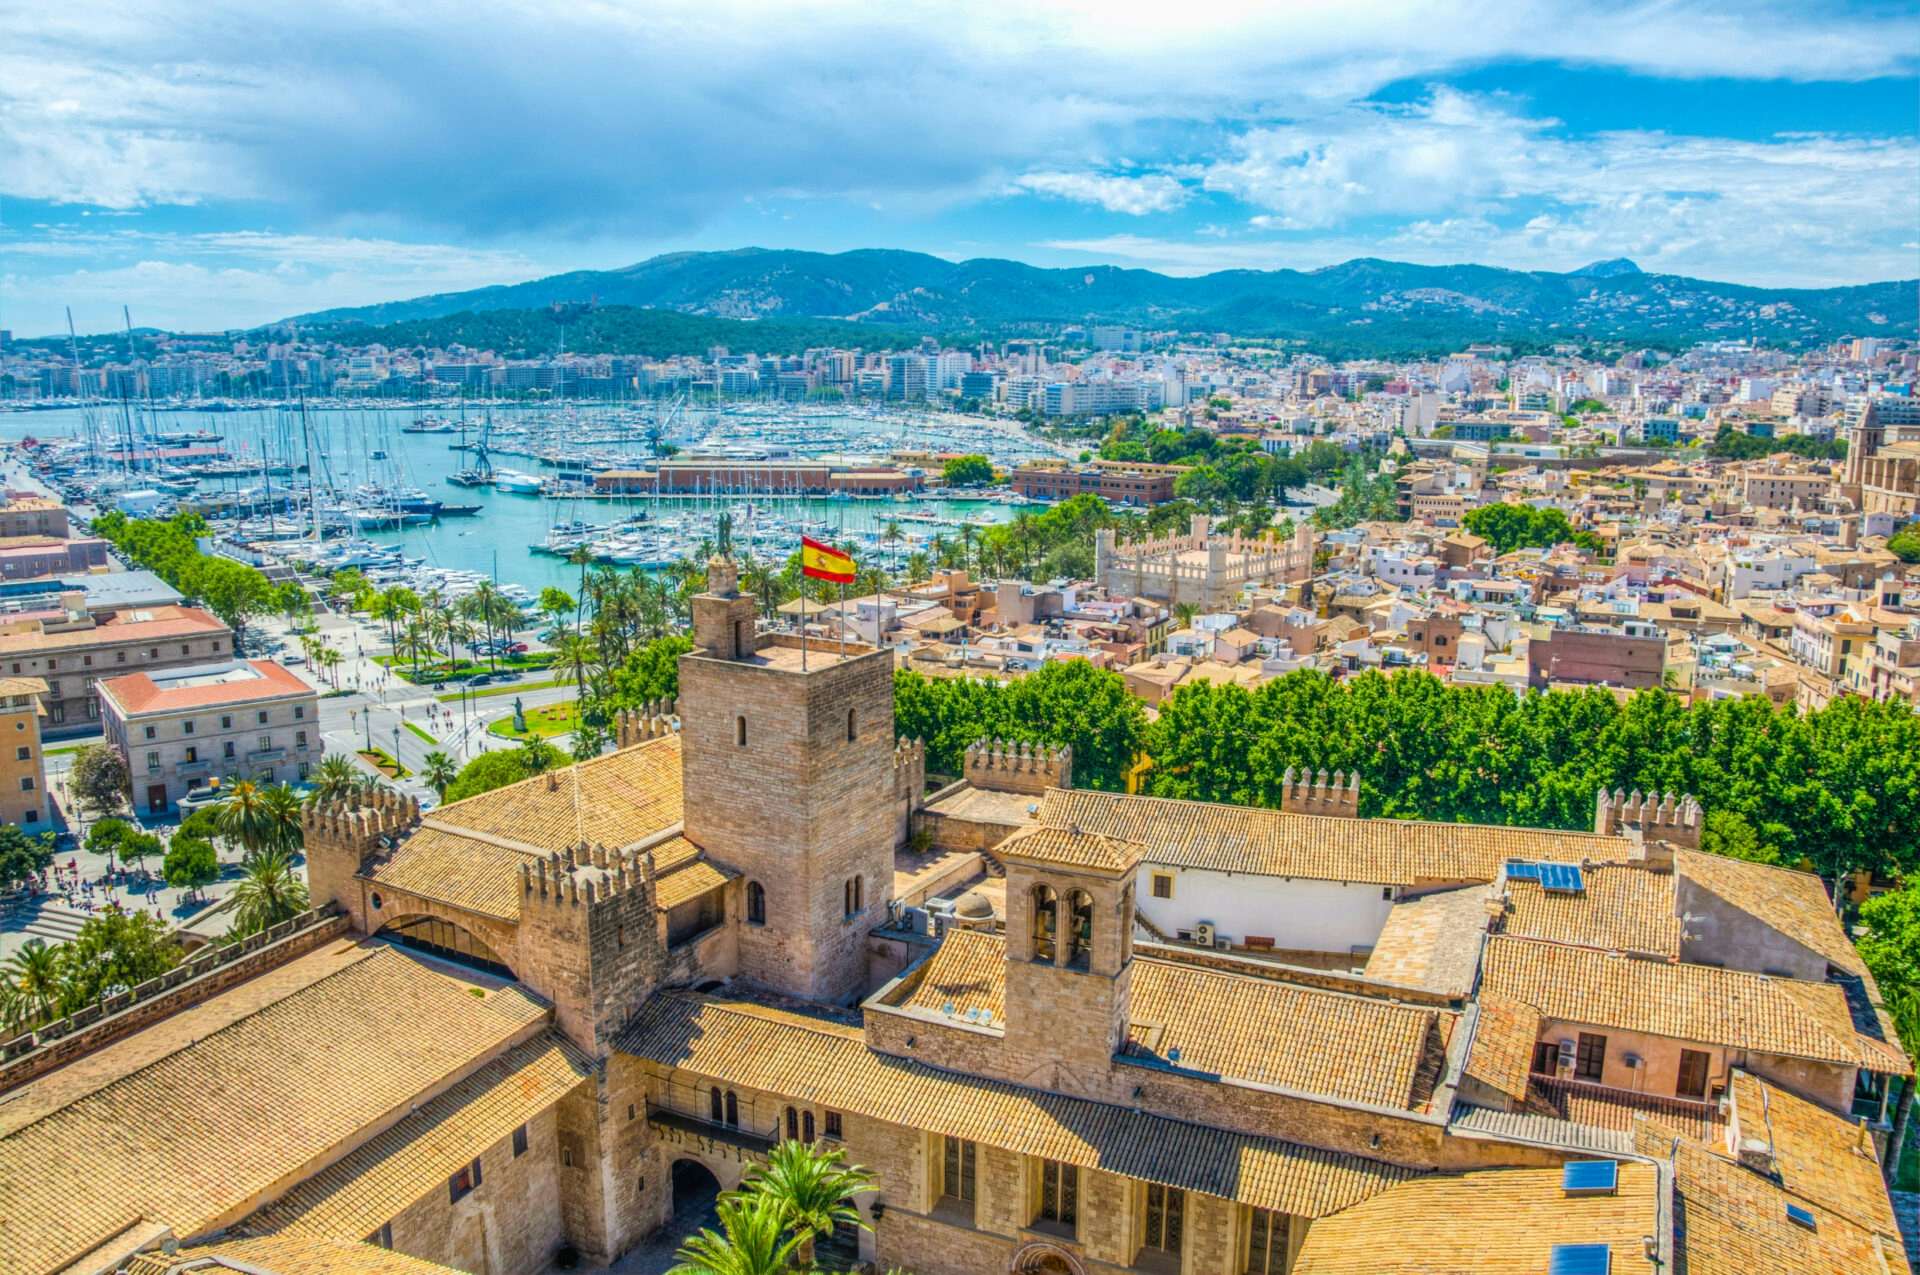 A panoramic aerial view of Palma de Mallorca, showcasing historical landmarks, modern residences, the bustling port, and the sun-kissed coastline on a beautiful day.